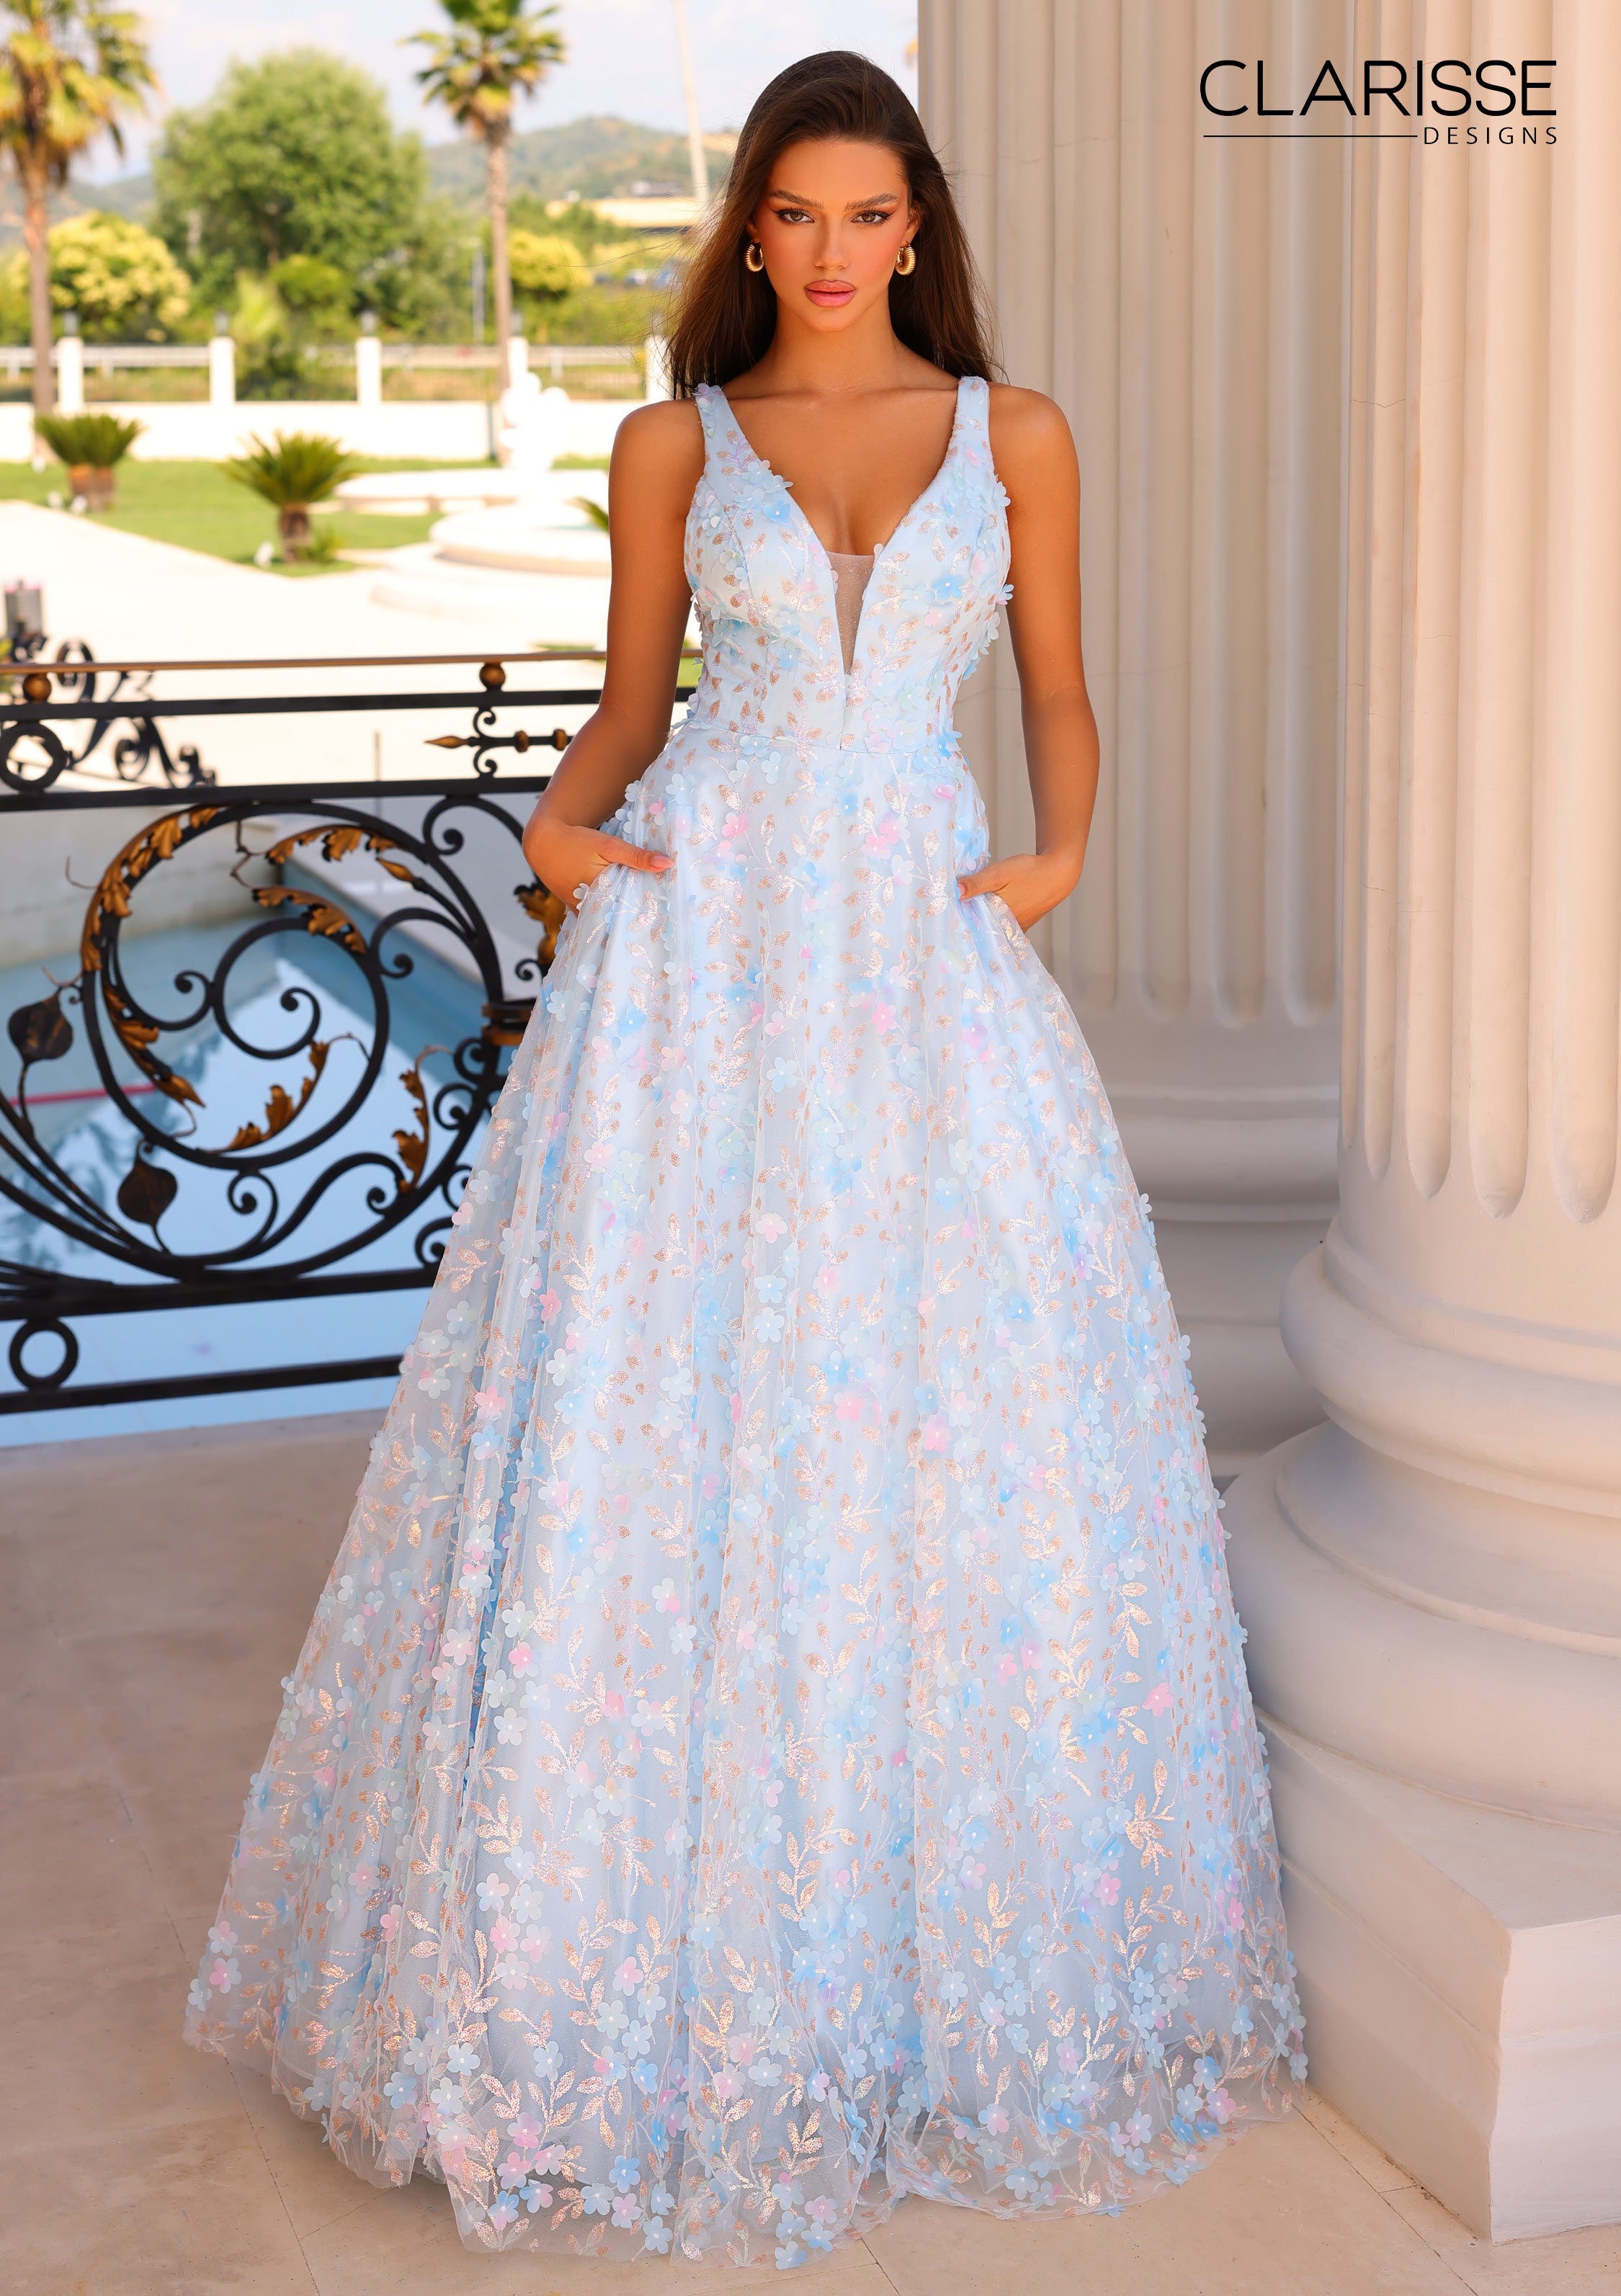 Stunning light blue ballgown with multi-color flower appliques.